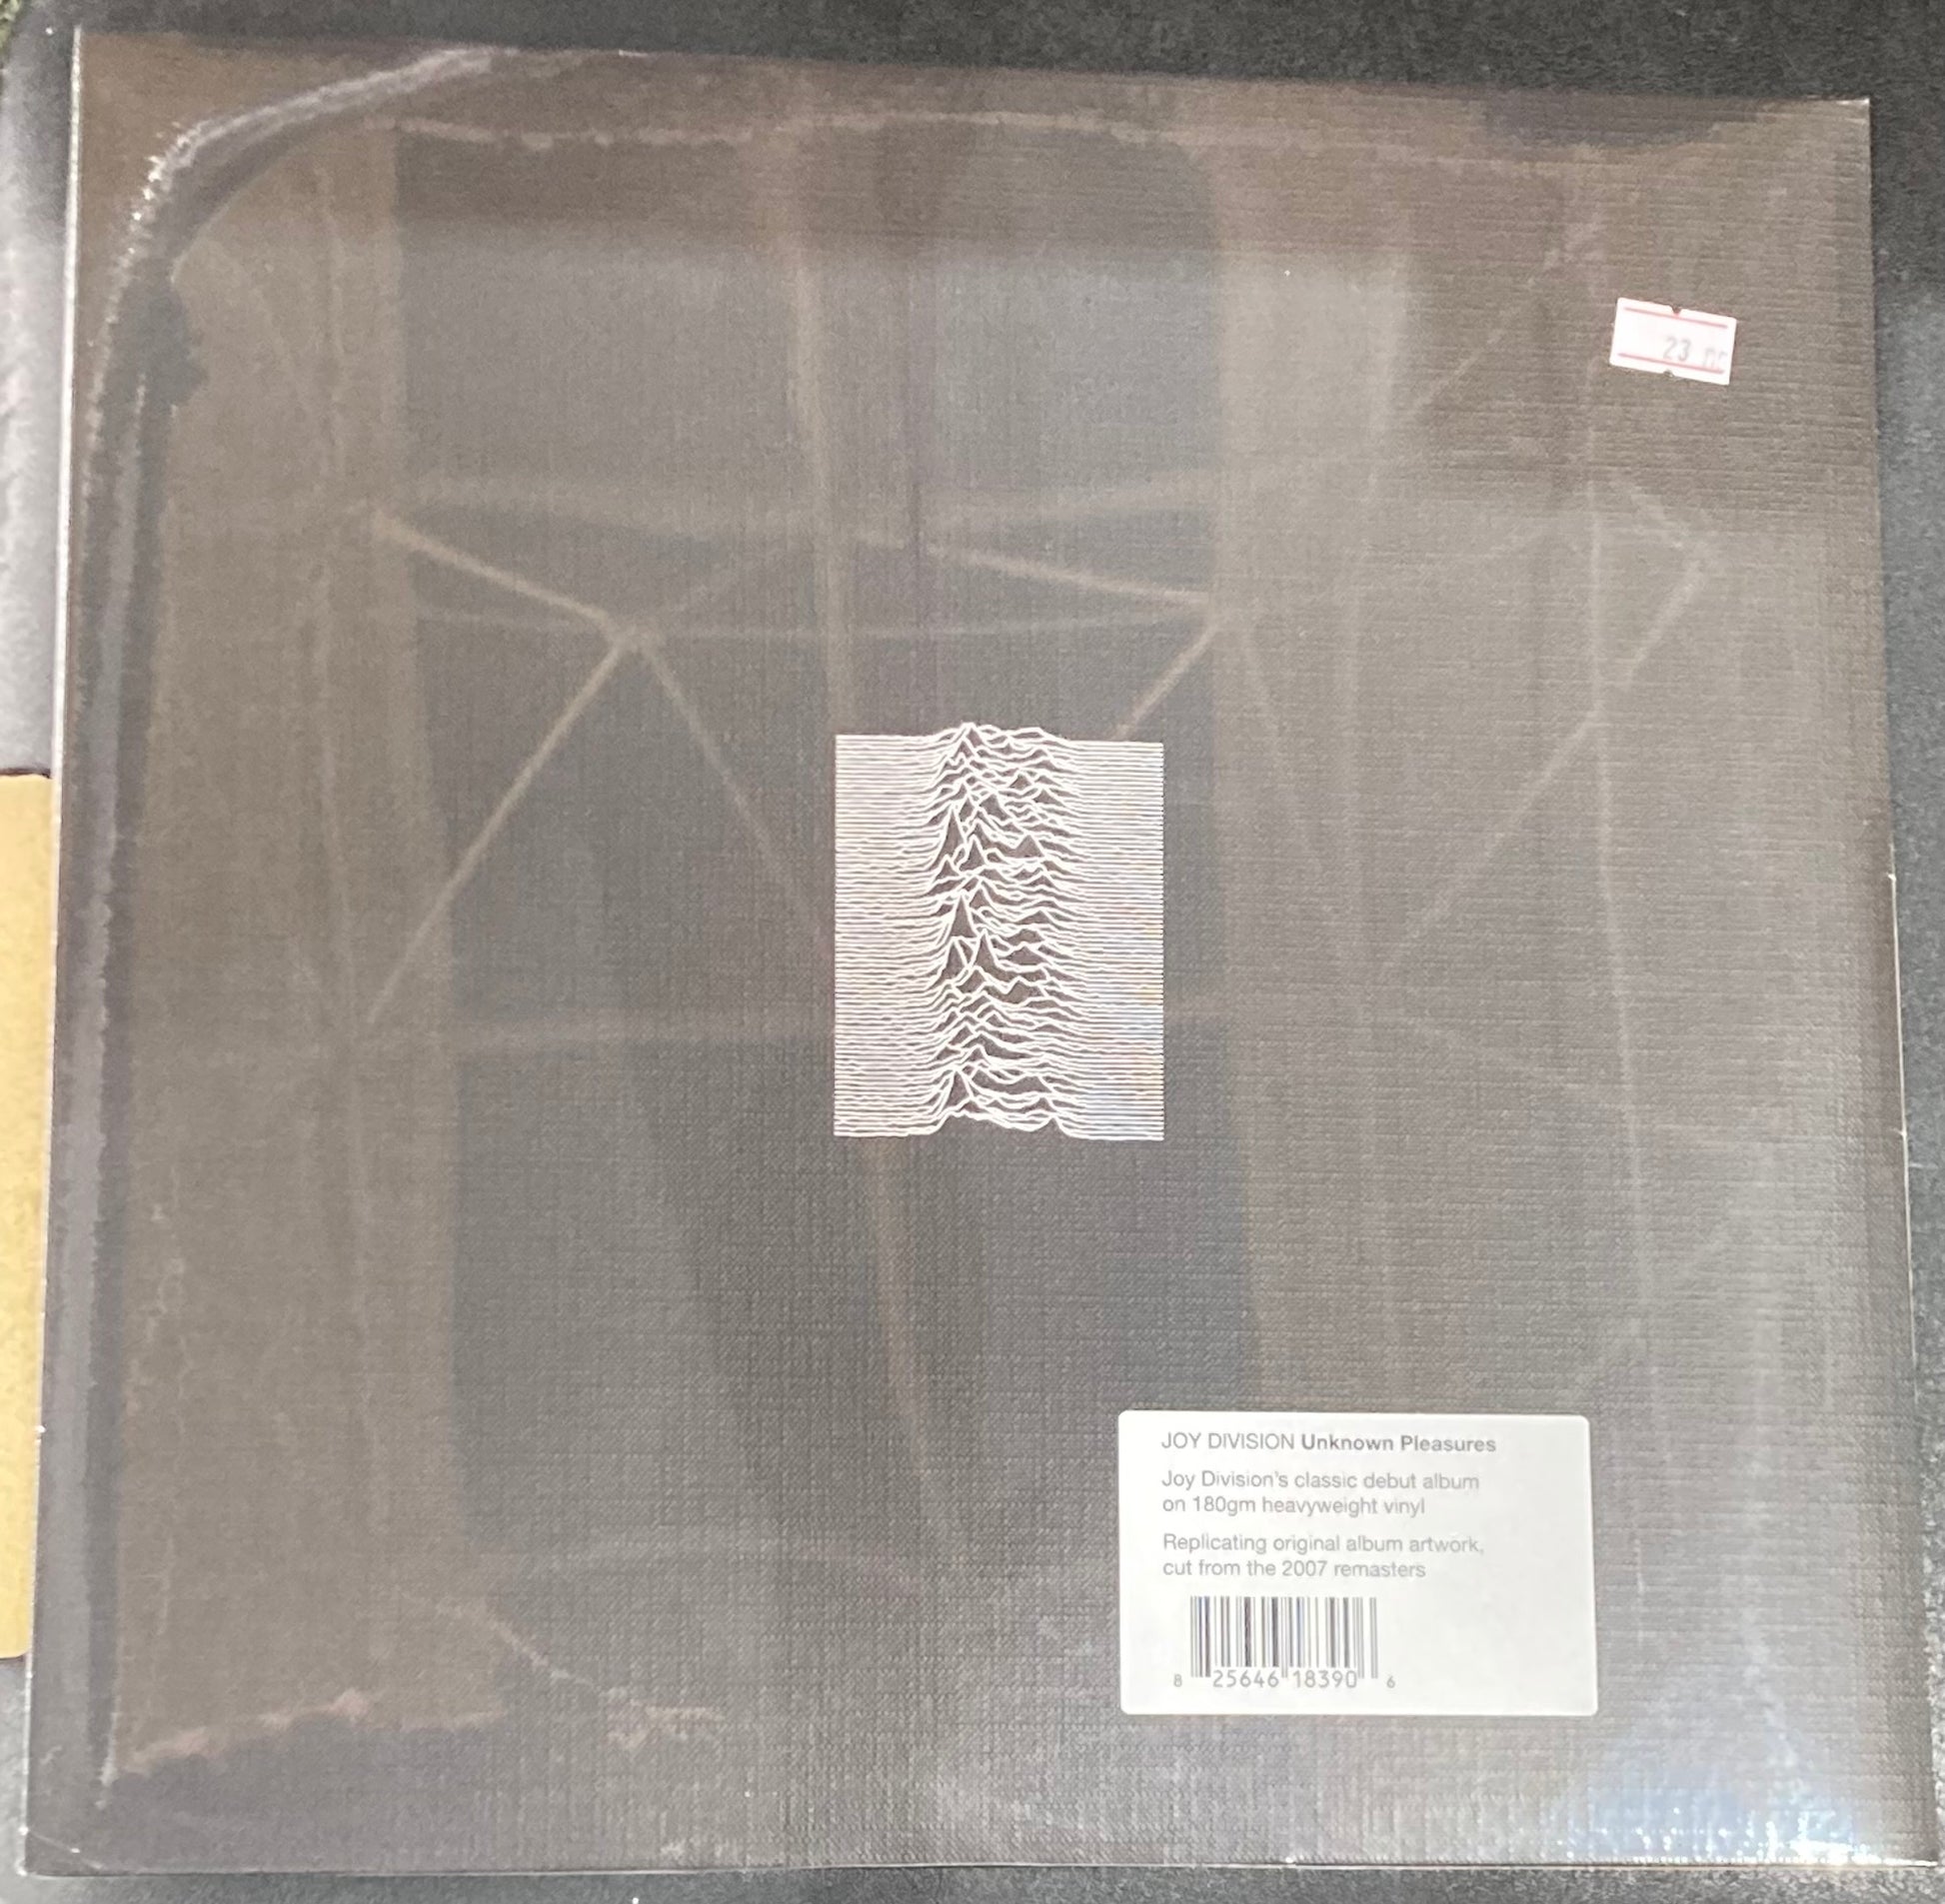 The front of 'Joy Division - Unknown Pleasures' on vinyl